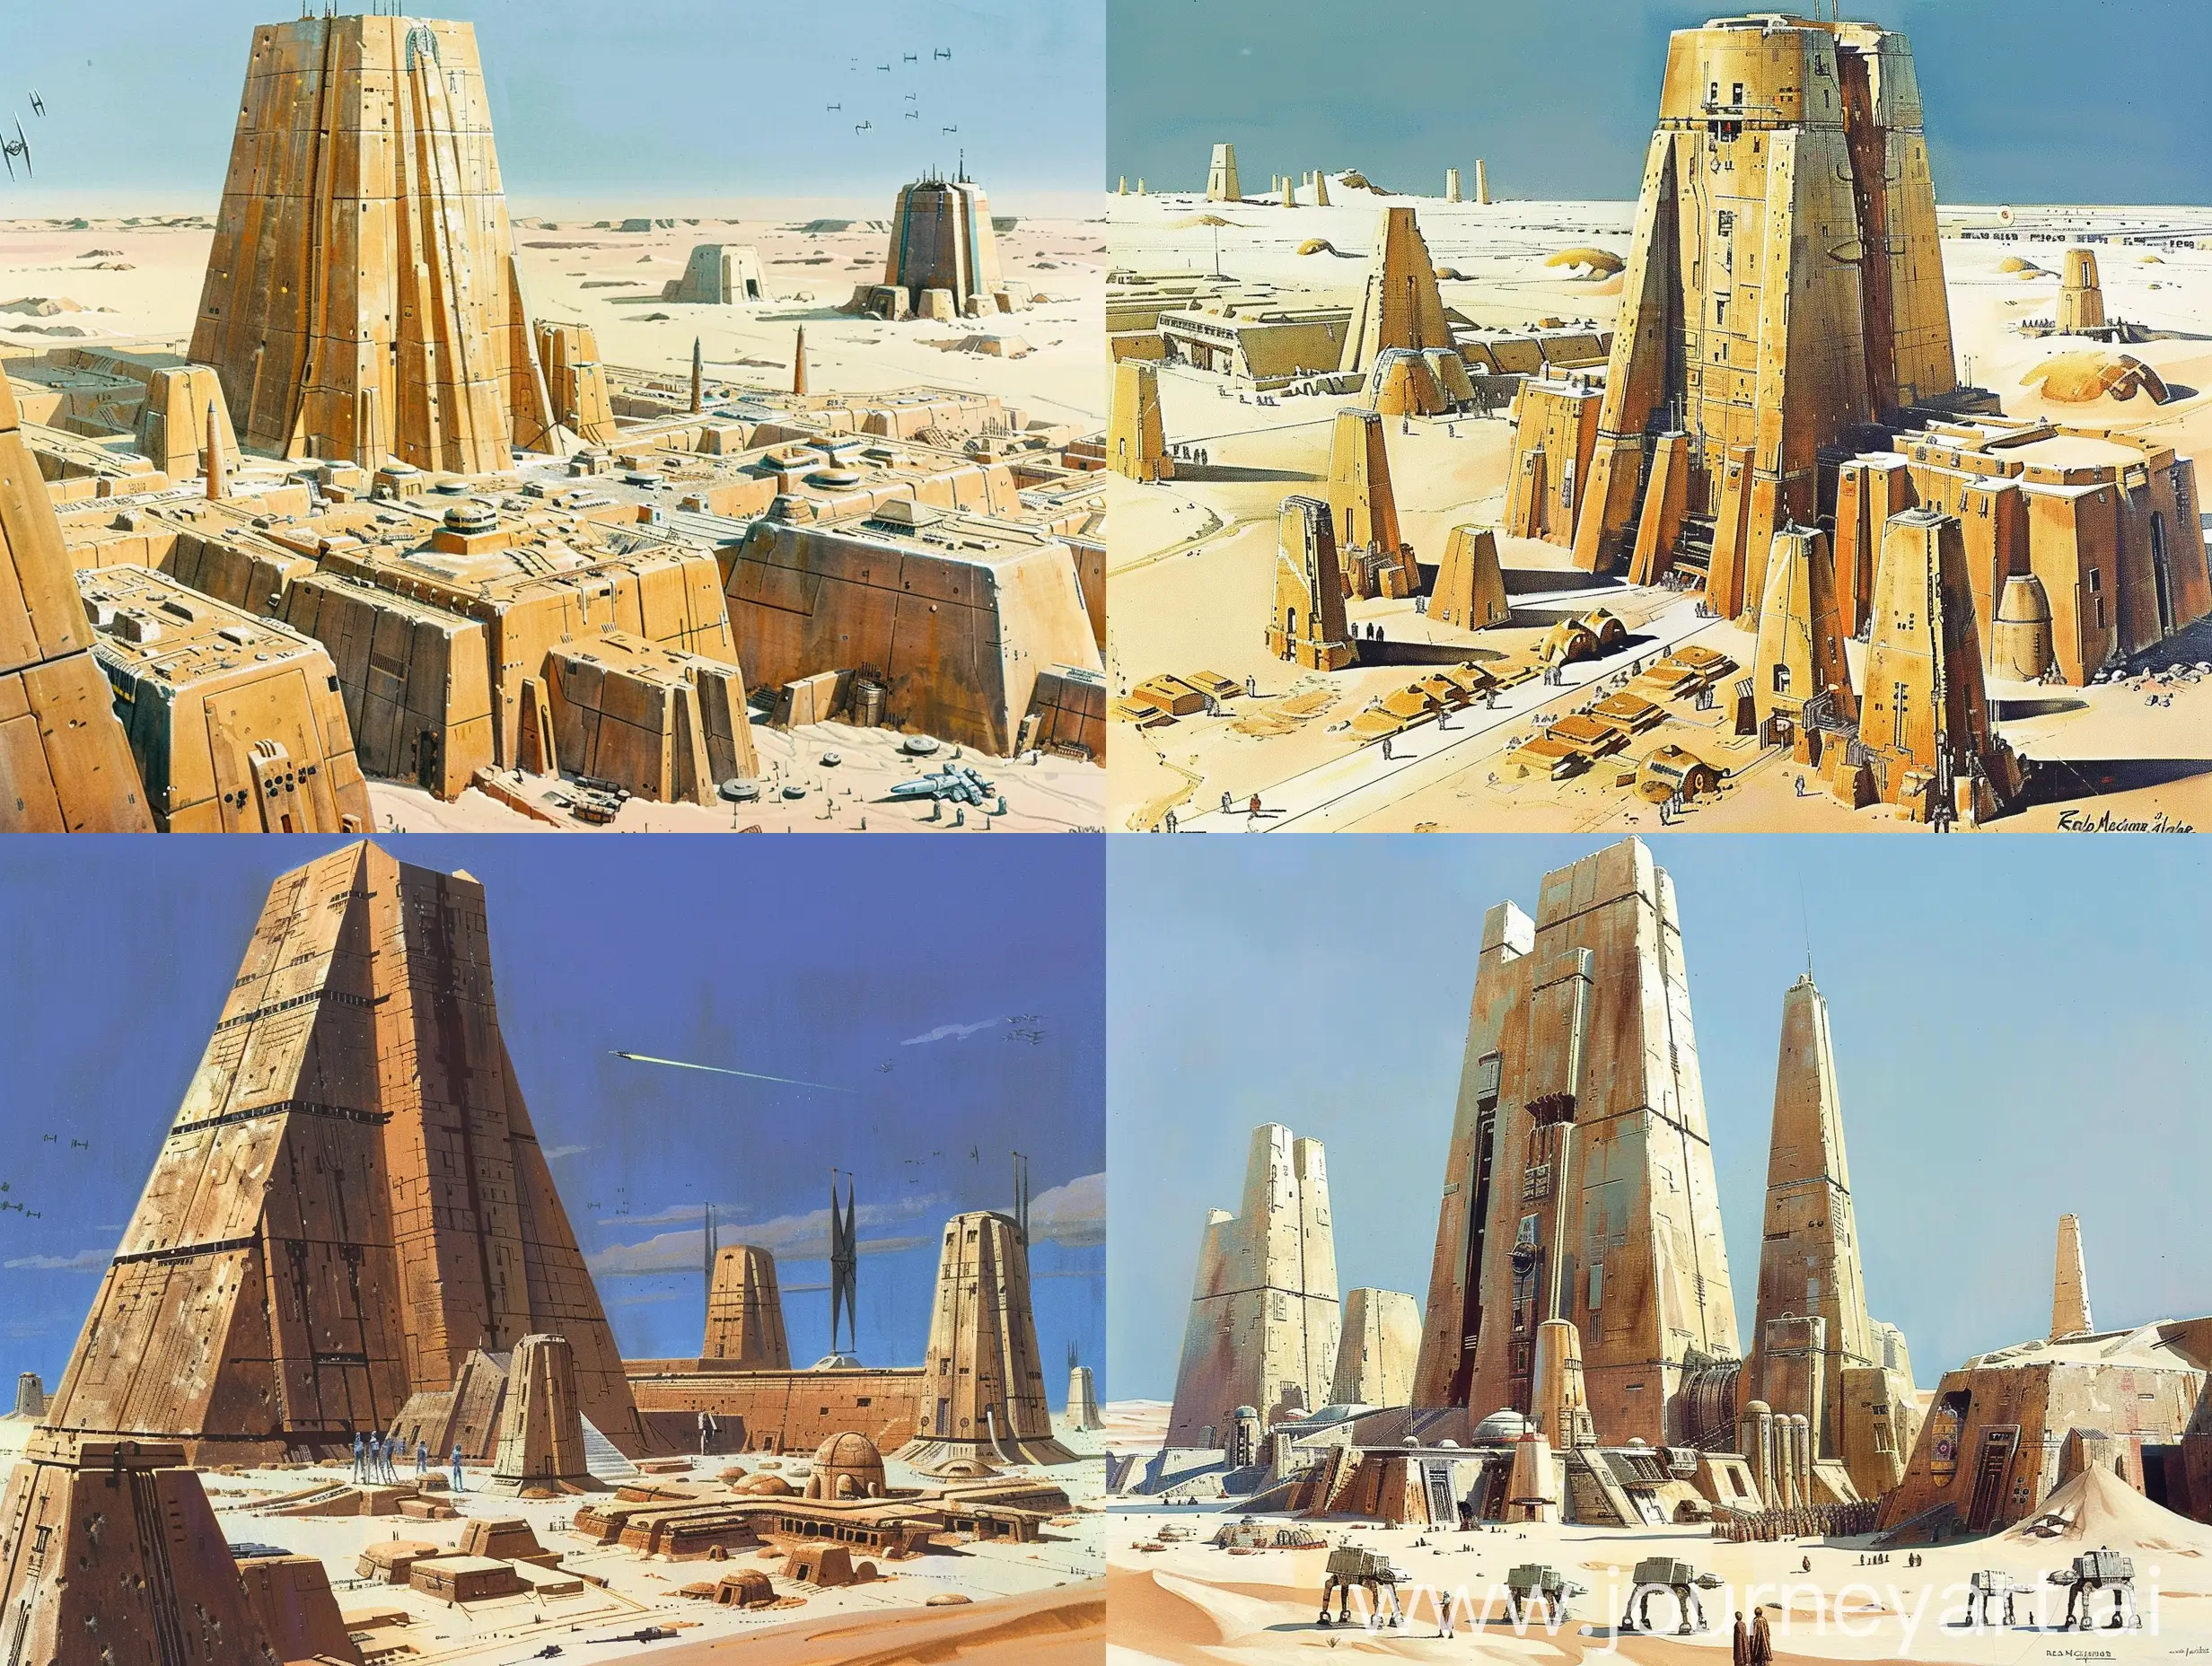 Old concept art by Ralph McQuarrie of a large tall tatooine palace similar in appearance to a ziggurat. other smaller desert city buildings around it. in retro science fiction art style. in color. 